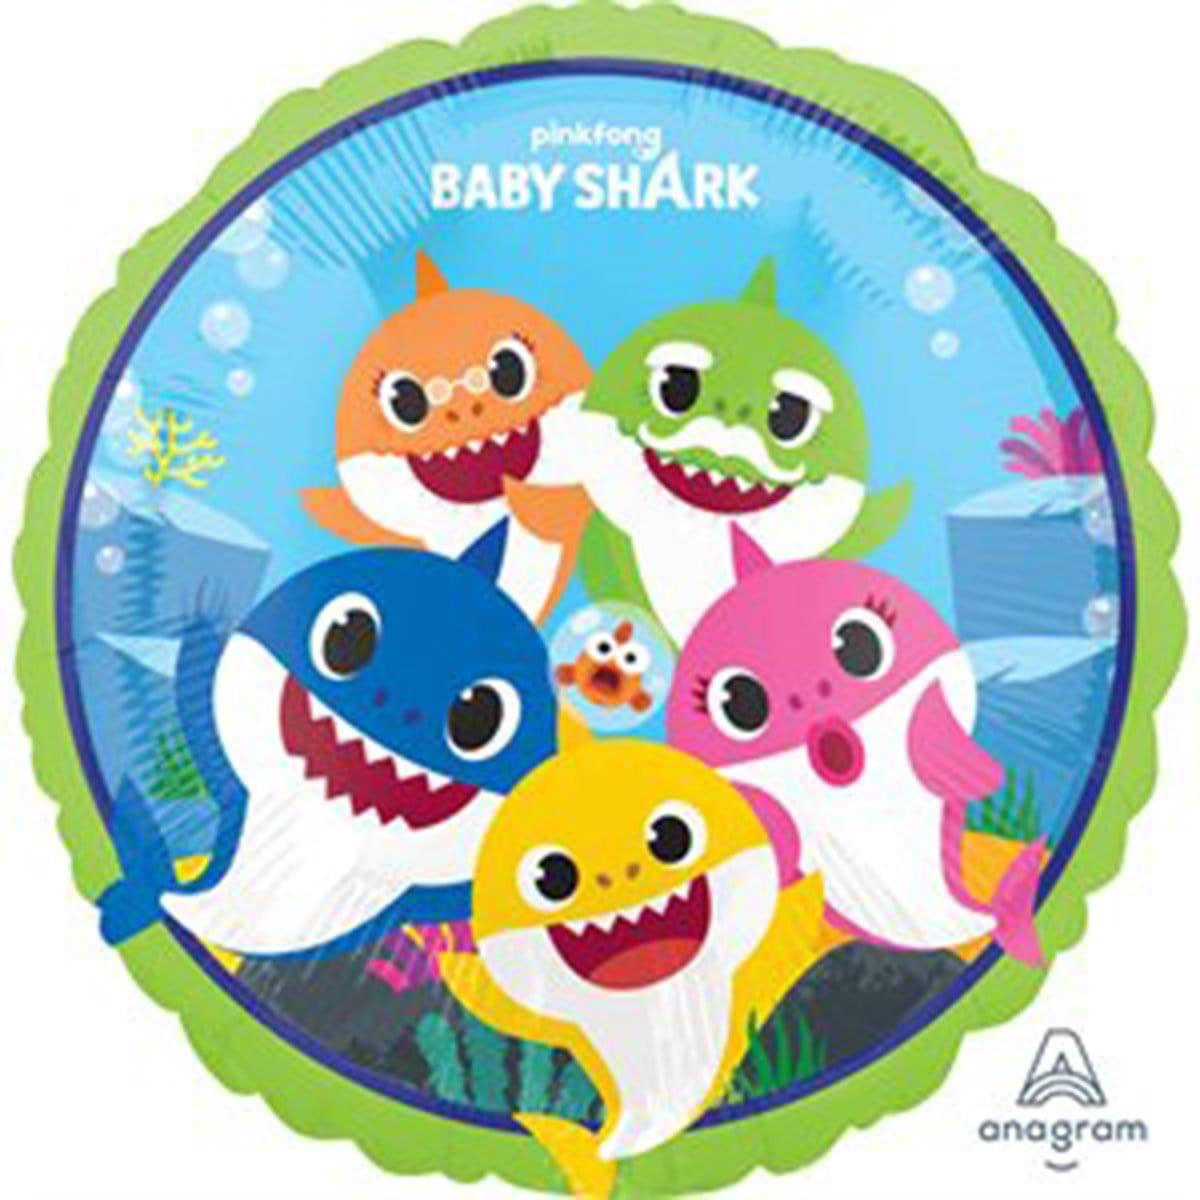 Buy Balloons Baby Shark Foil Balloons, 18 Inches sold at Party Expert